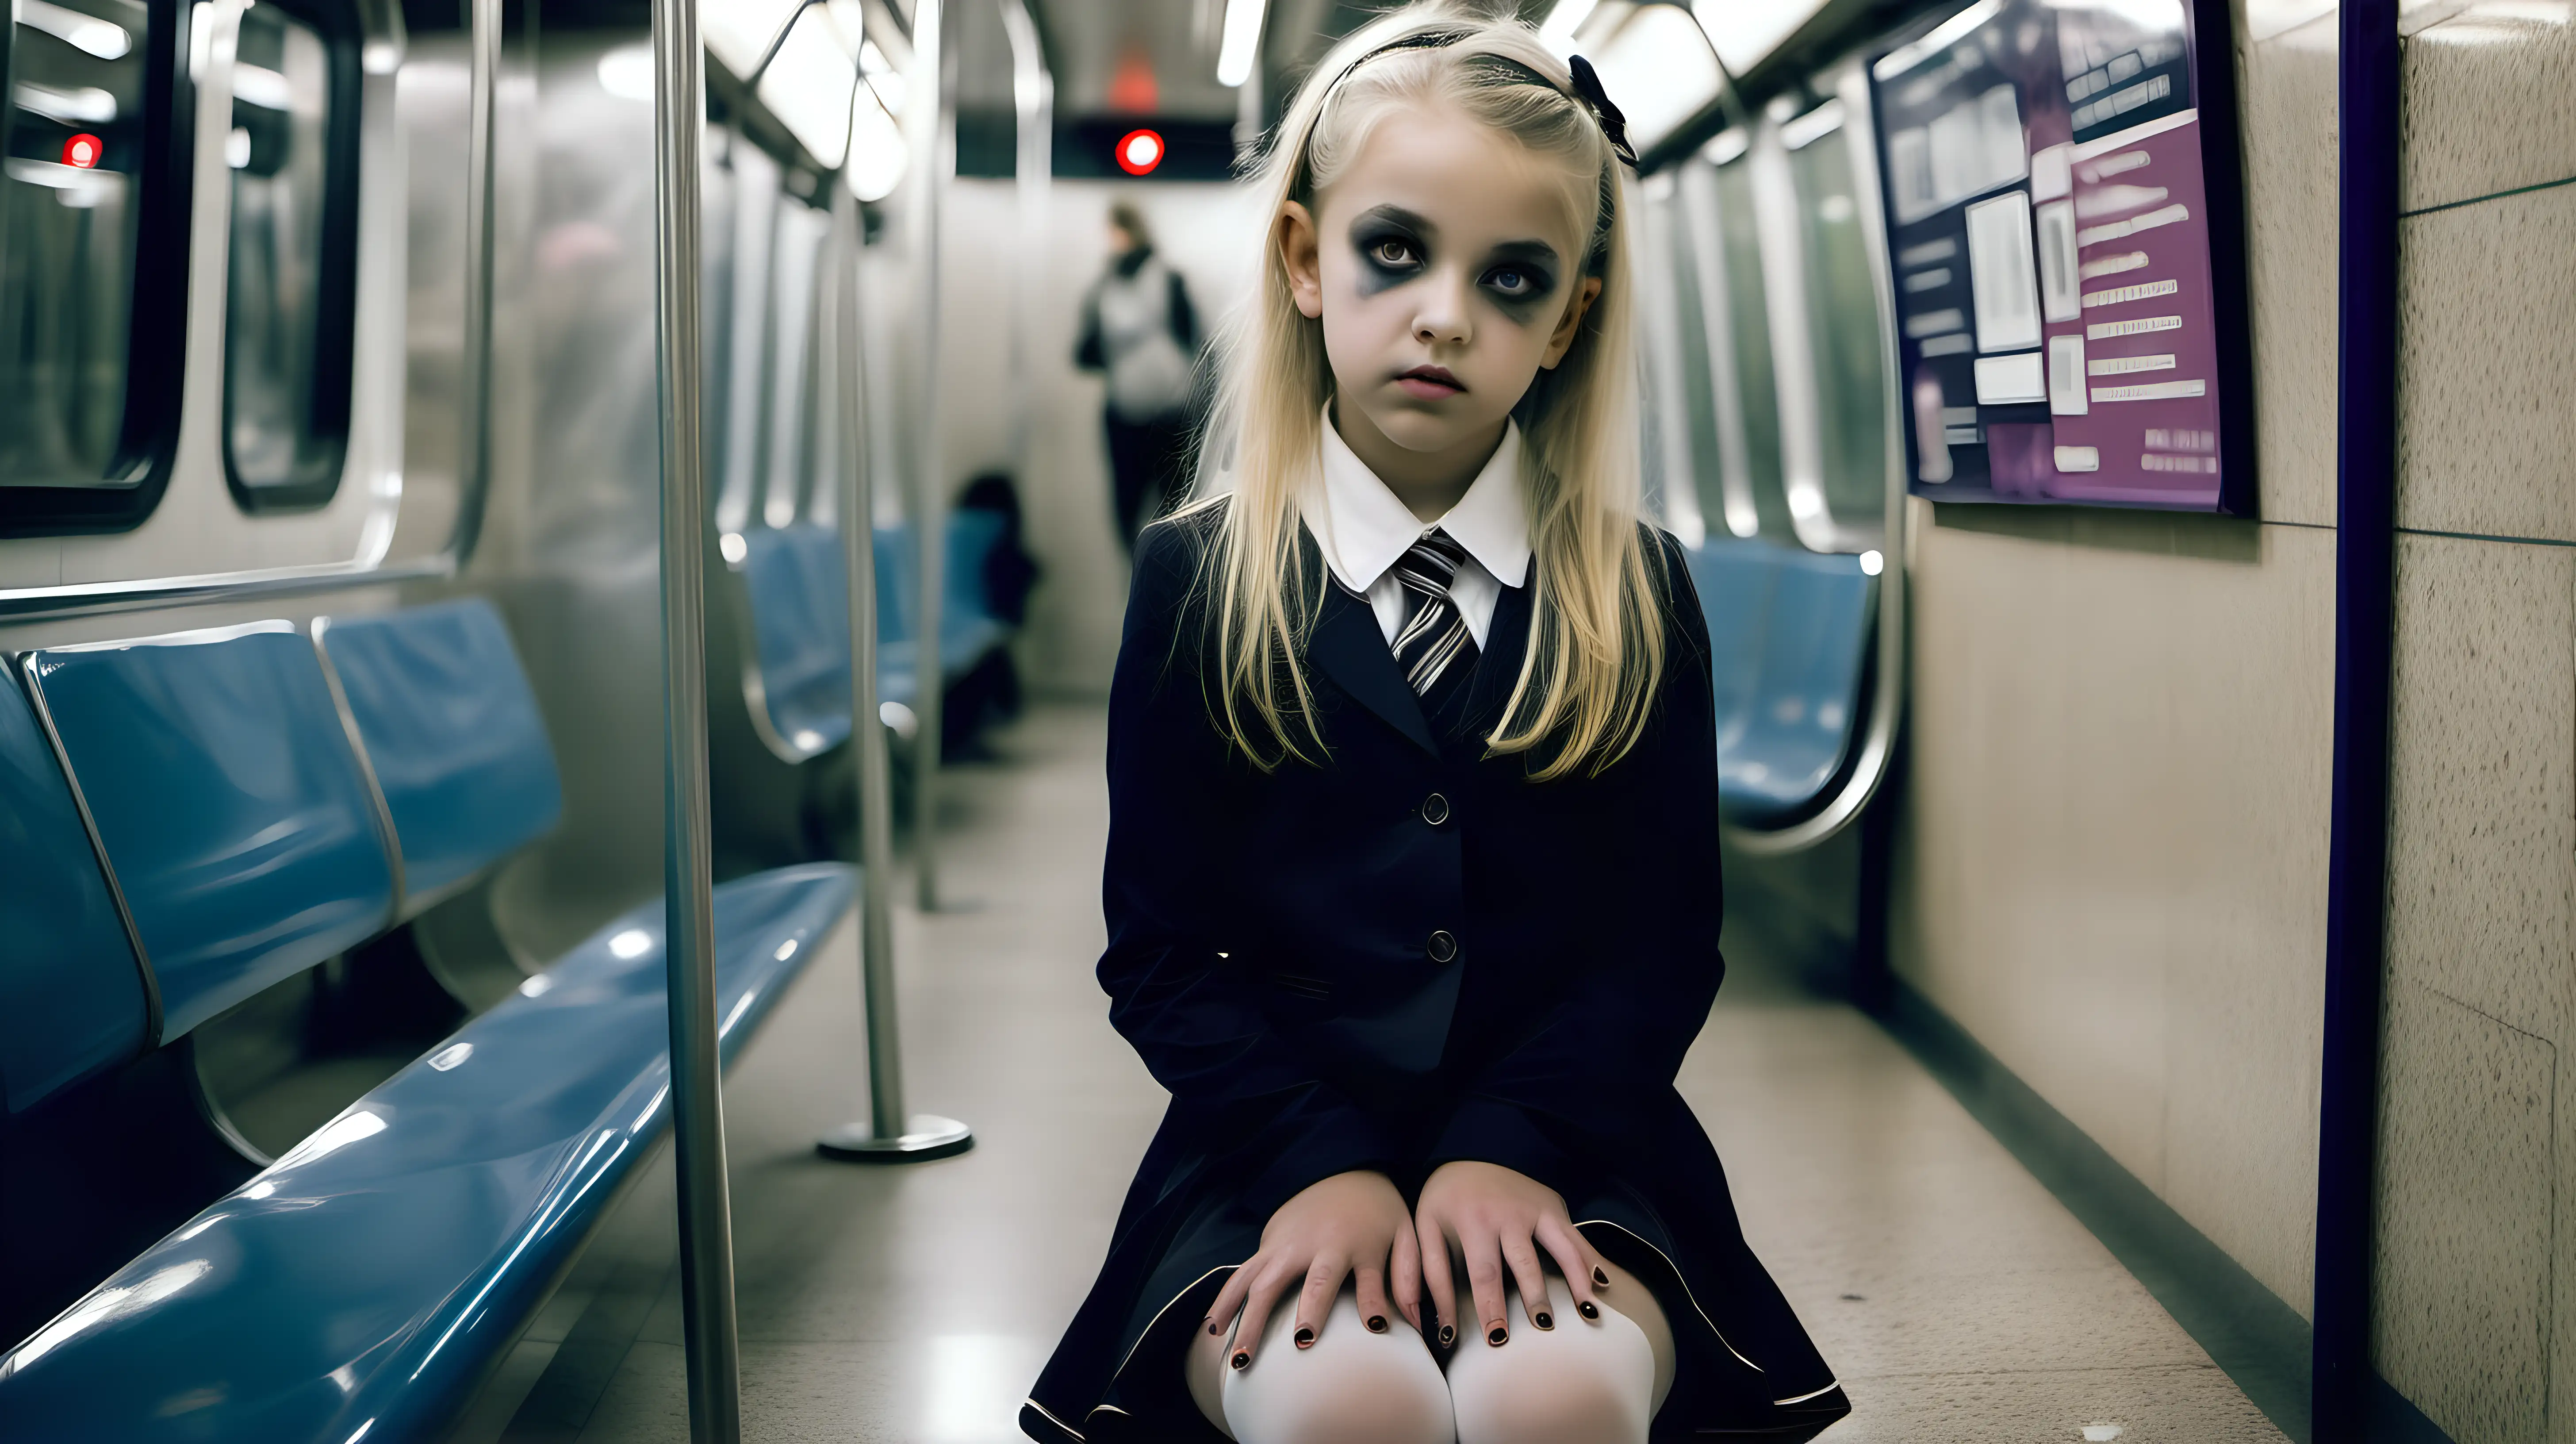 
 
shot with Nikon AF-S DX NIKKOR 35mm f/1.8G Lens in the street  

portrait of gothic blond little girl 9 years old little girl, wearing schoogirl uniform, black  tights diffused light low pony hair clear eyes  wearing    tights  with mom  nordic model, sitting on a seat in the subway diffused light
, elle porte  des collants en cellophane  transparents, sa maman Goth girl. Neon lights.  .  makeup flow, zoom face
wearing latex shiny dress 
des hauts talons stiletto,  
 dans les couloirs du métro, beaucoup de néons et de lumières blanche

with mom  wearing     dress,   black tights, [Highly Detailed]     
with high heels stiletto,  
look sad, make-up flow

zoom face

suntanned skin, natural skin texture, (highly detailed skin:1.1), 
textured skin, (oiled shiny skin:0.5), 
 ,intricate skin details, visible skin detail, (detailed skin 
texture:1.1), mascara, (skin pores:1.1),  , skin fuzz, (blush:0.5), (goosebumps:0.5), translucent 
skin, (minor skin imperfections:1.2),    
(round iris:1.1), light reflections in her eye, visible cornea, highly detailed iris, remarkable detailed pupils 

portrait shot , zoom eyes

--v 6
